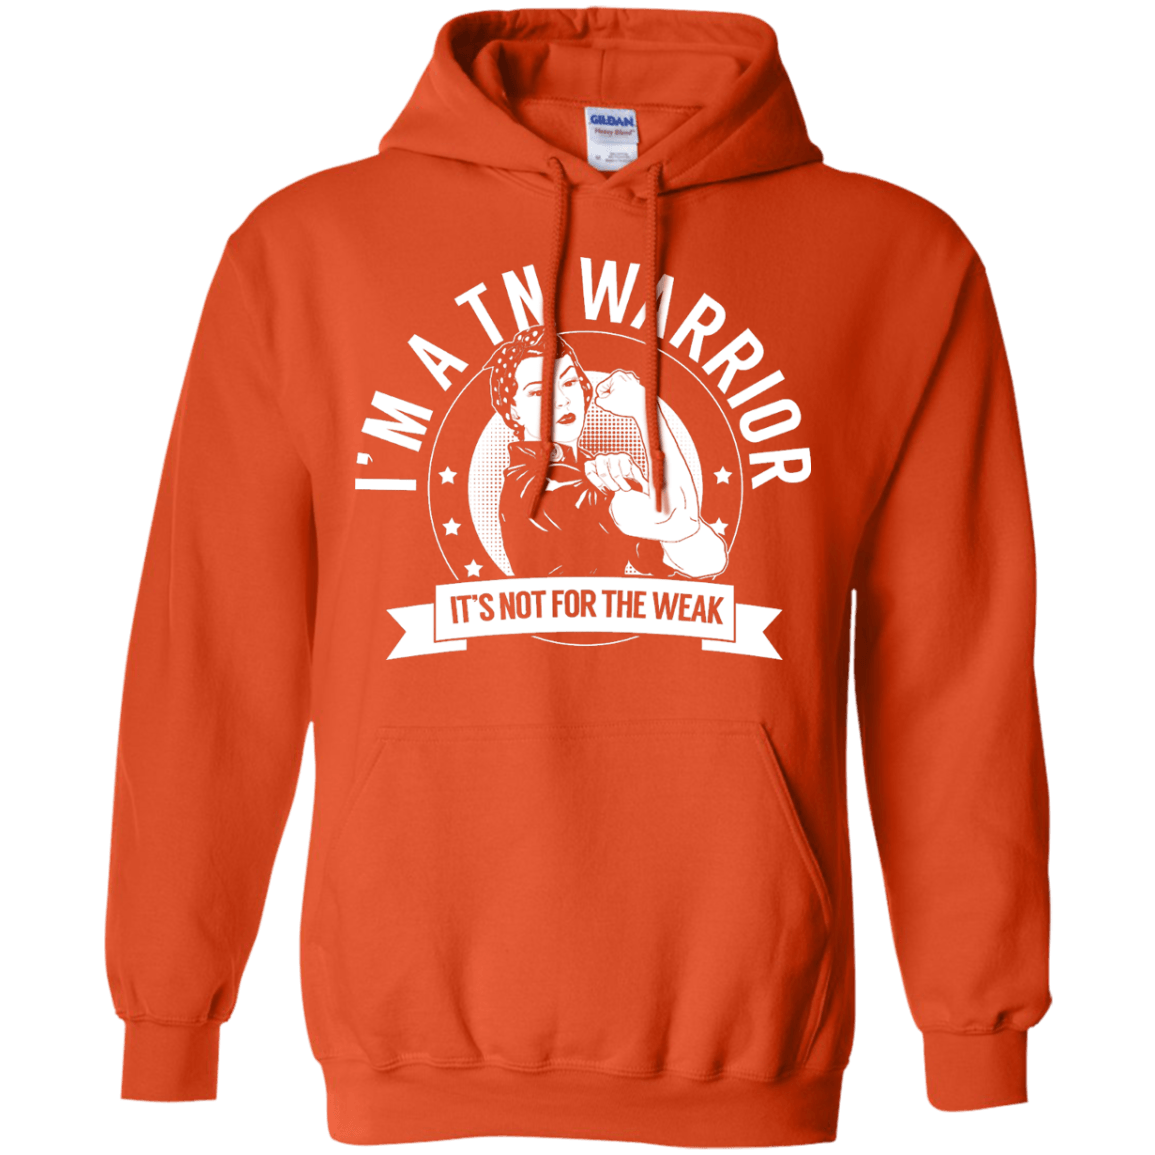 Trigeminal Neuralgia - TN Warrior Not For The Weak Pullover Hoodie 8 oz - The Unchargeables